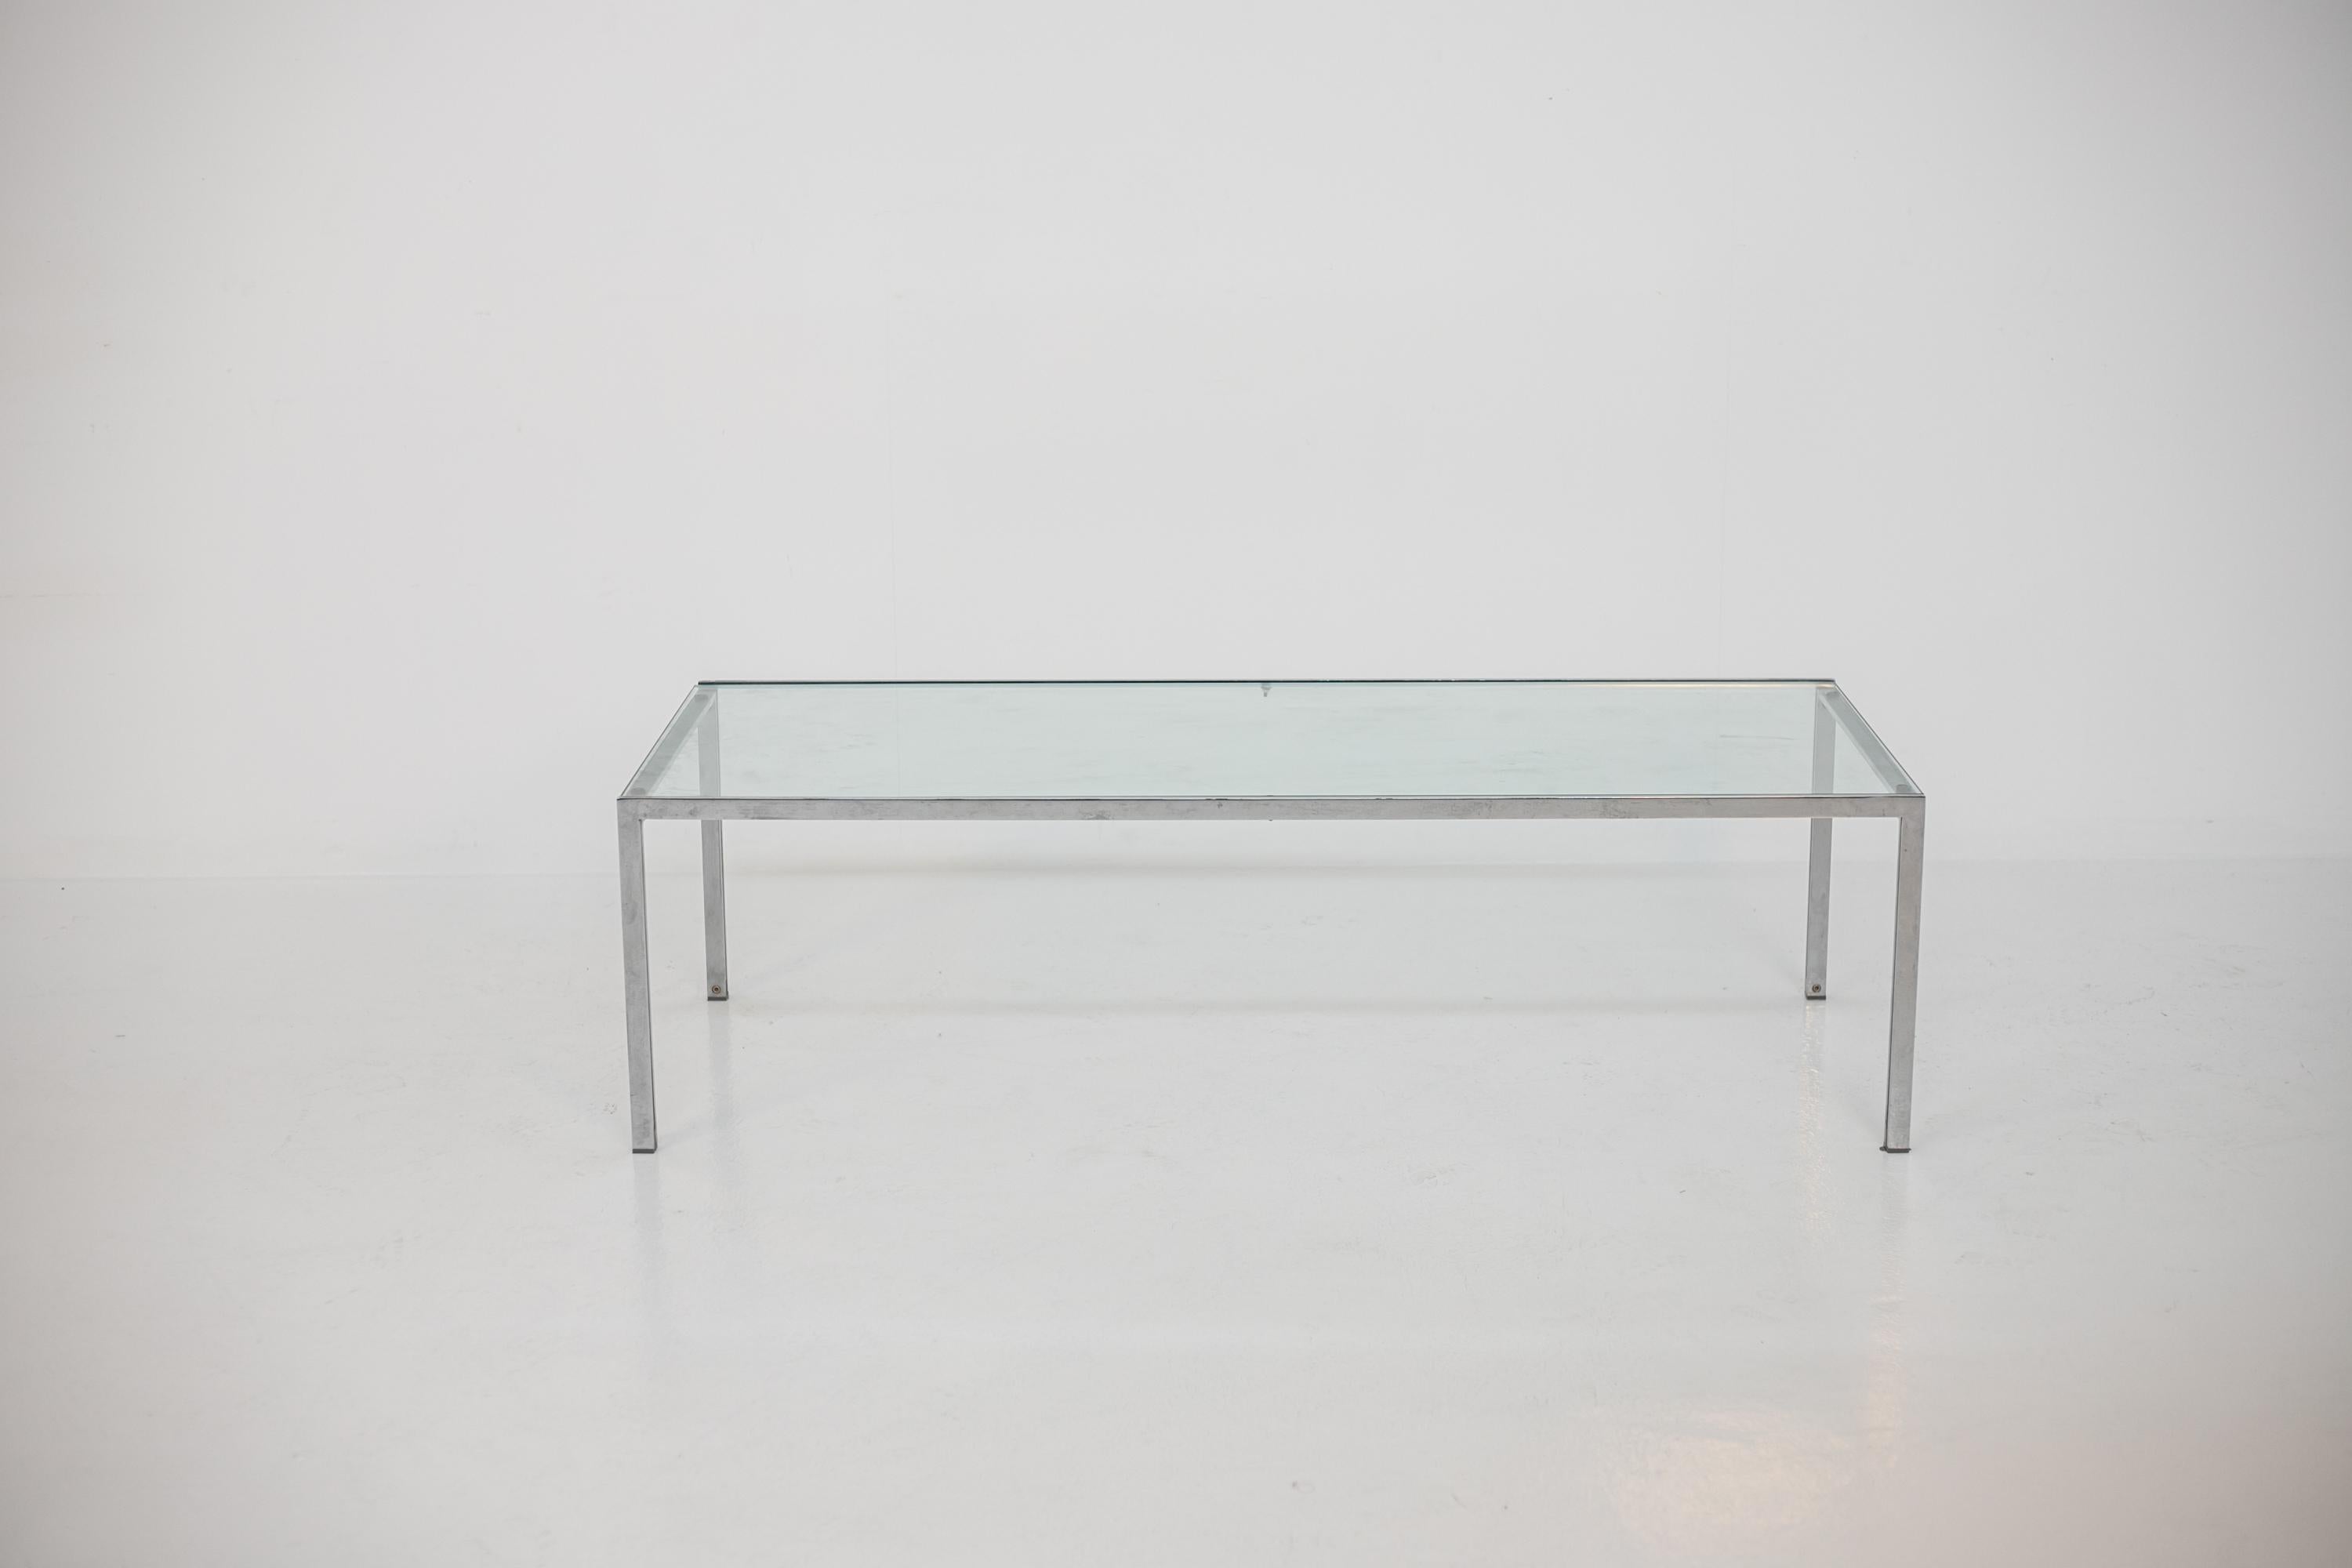 Smoking table for the 1960s living room made by Ross Littell for the DePadova manufacture. The living room table given its large size is ideal as a center table and is made with a steel frame. The table top is made of a 2 cm thick glass, original of